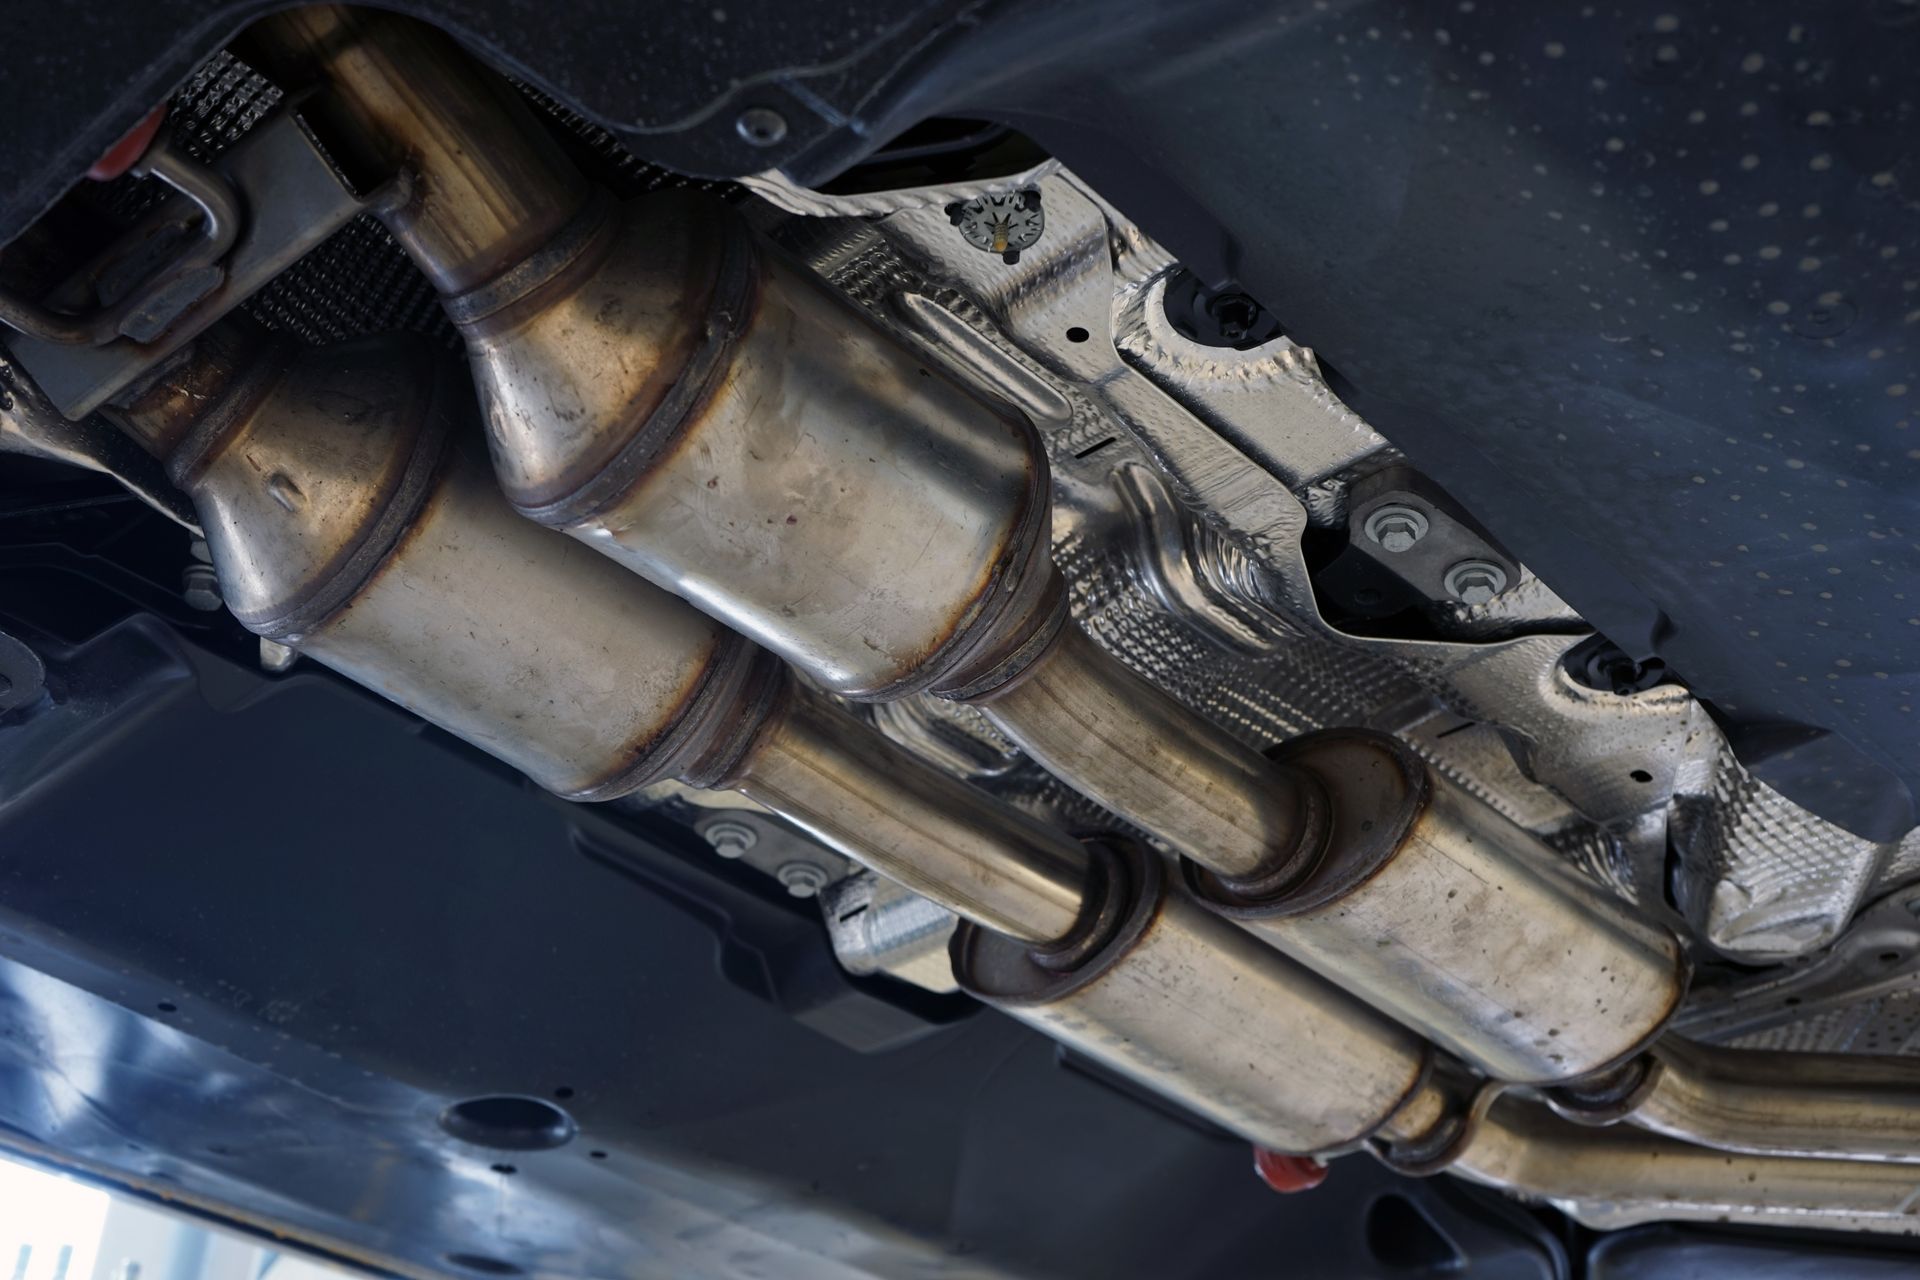 A catalytic converter (catalyst) installed on a modern car